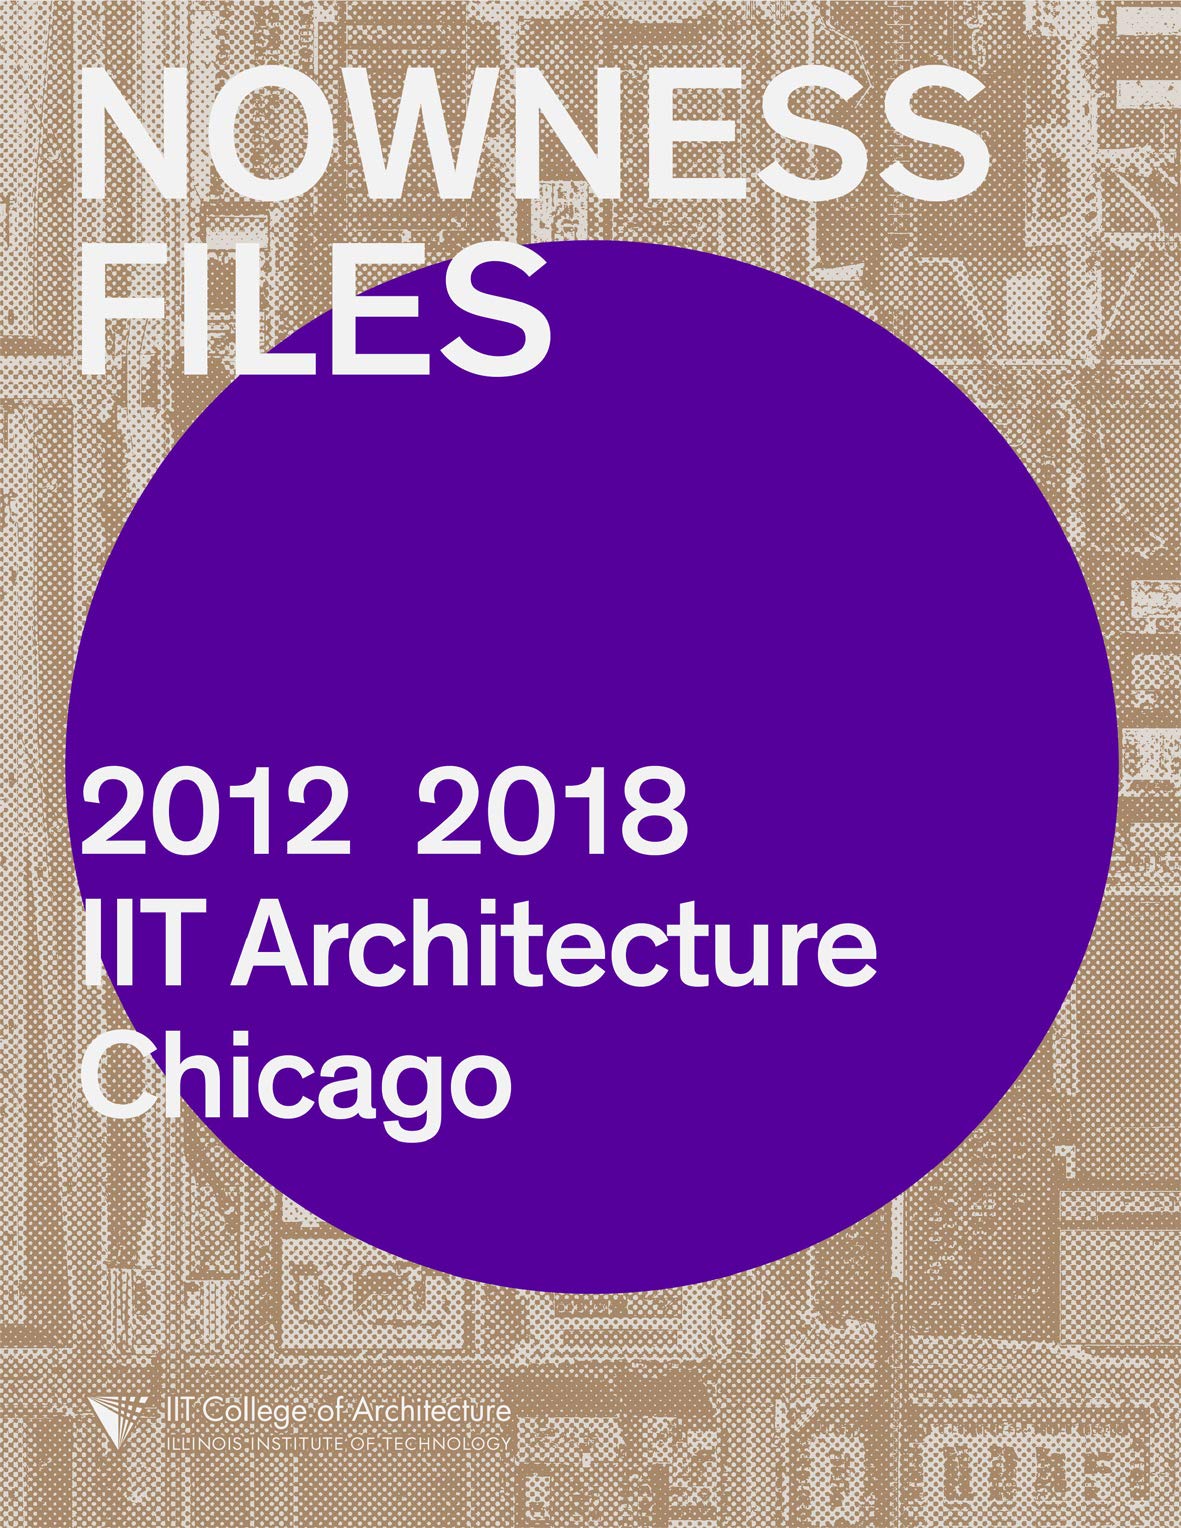 Nowness Files: 2012-2018: IIT Architecture Chicago